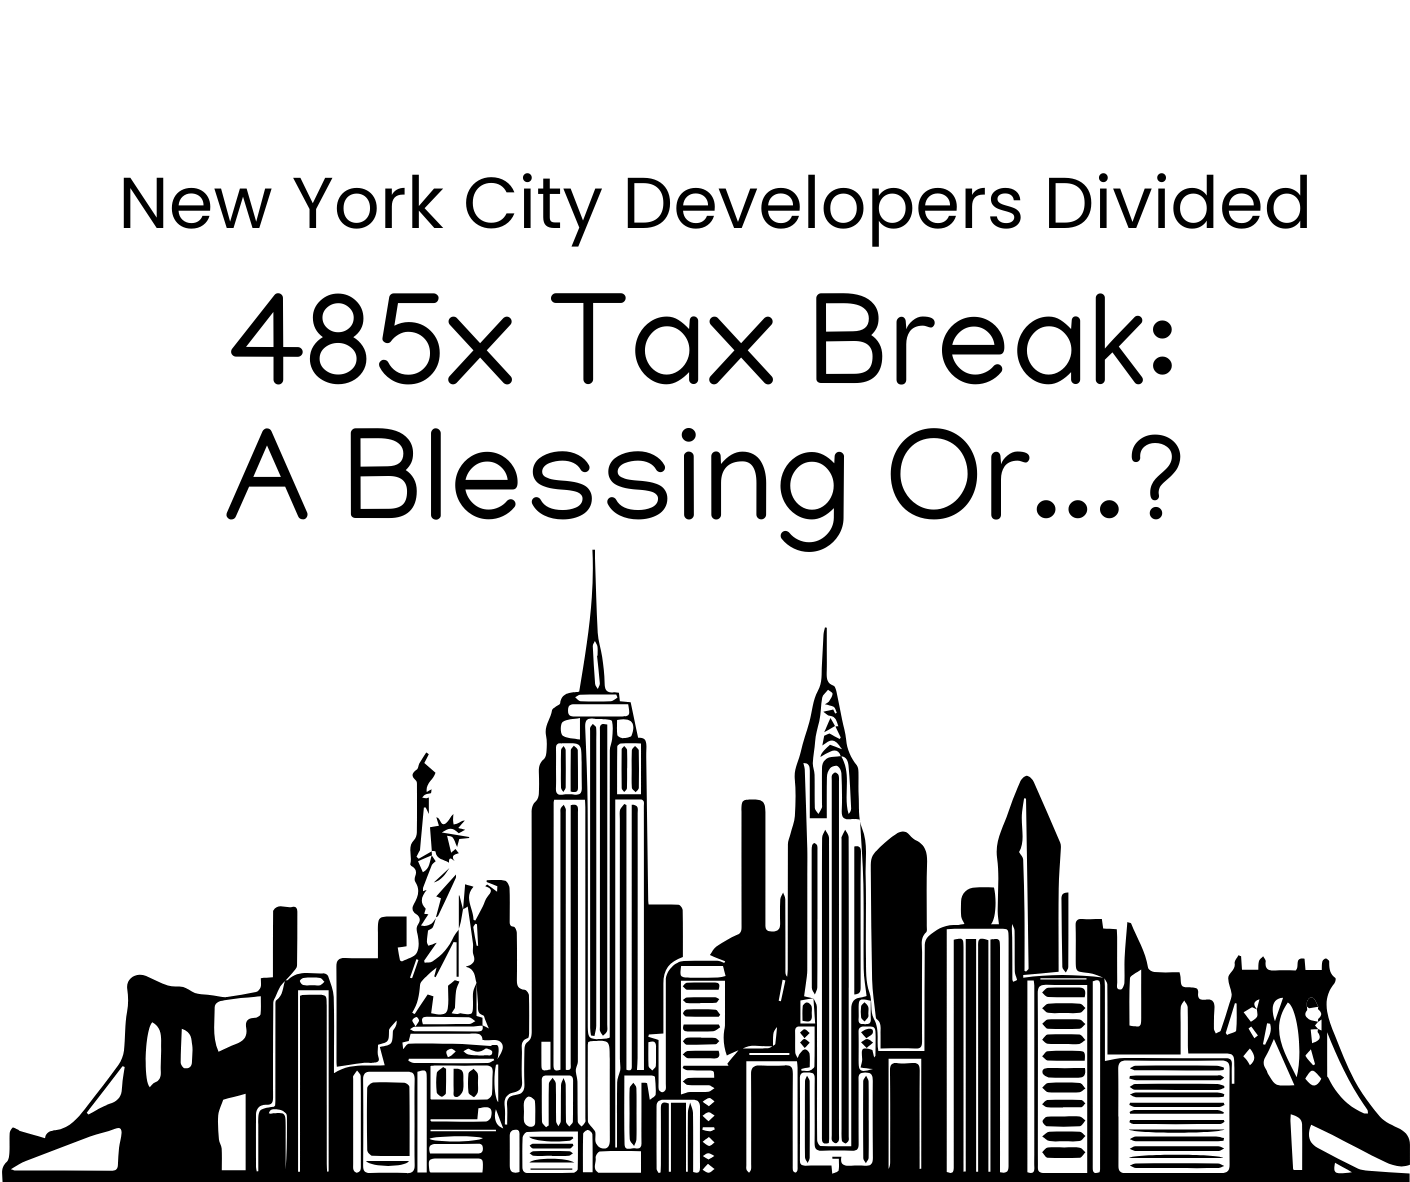 New York City Developers Divided: Is 485x Tax Break a Blessing...or?